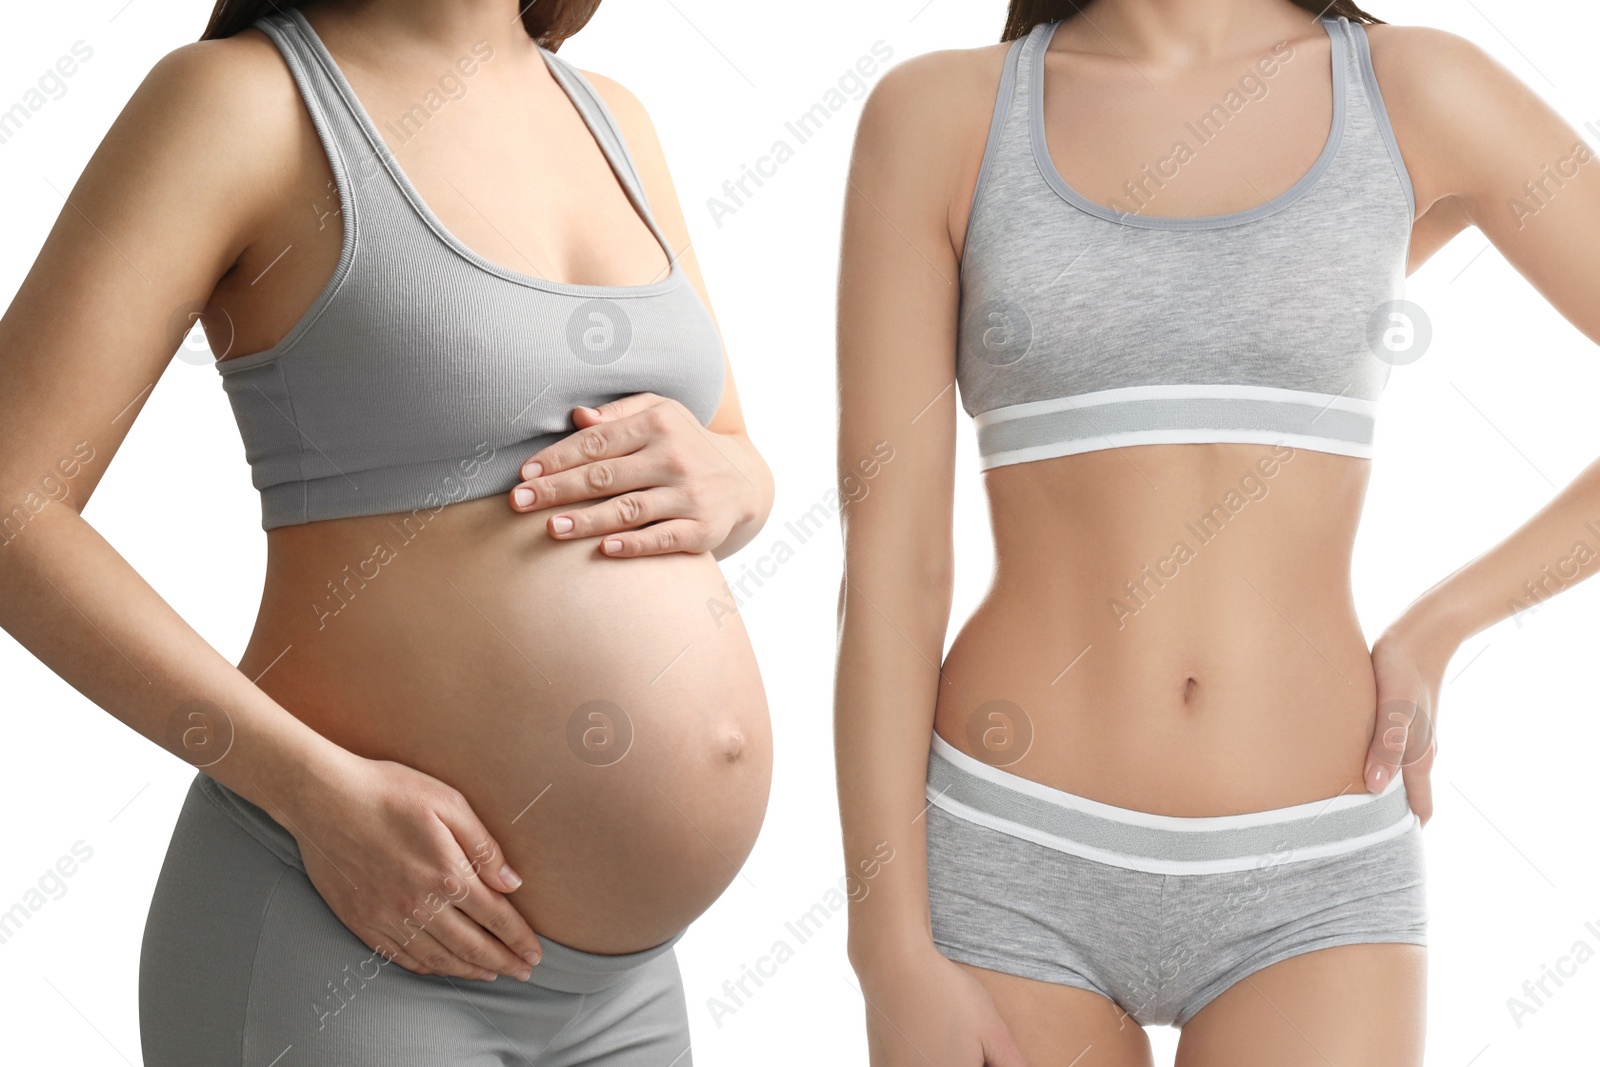 Image of Woman before and after childbirth on white background, closeup view of belly. Collage